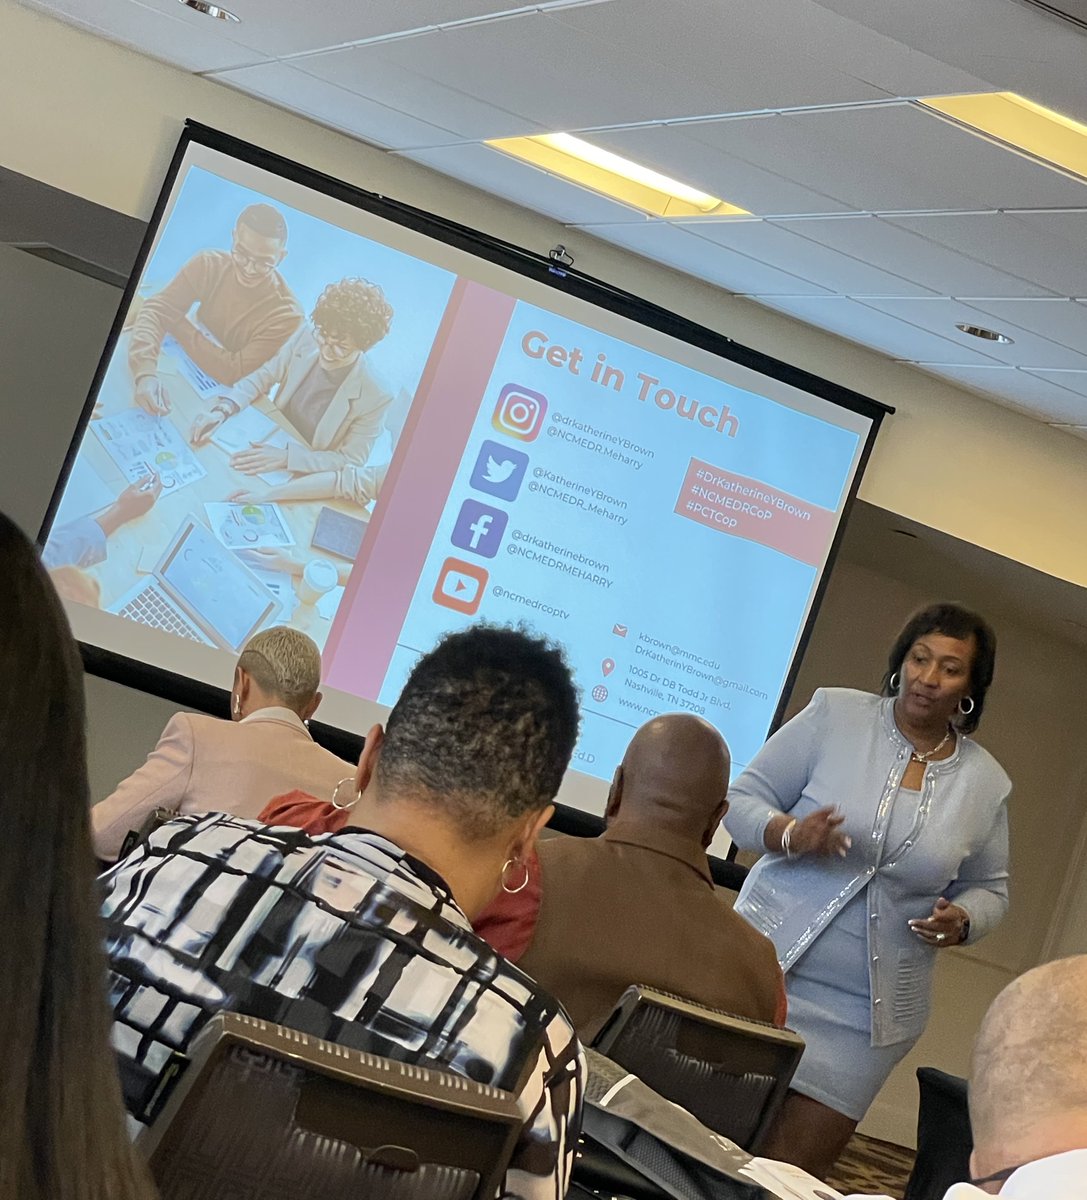 Our founder, @javeauriel is at the 16th Health Disparities Conference @ XULA, learning “Social Media and Health Equity: Being Current for Effective Engagement” with @KatherineYBrown #Equity #NCMEDRCoP #PCTCop @NCMEDR_Meharry